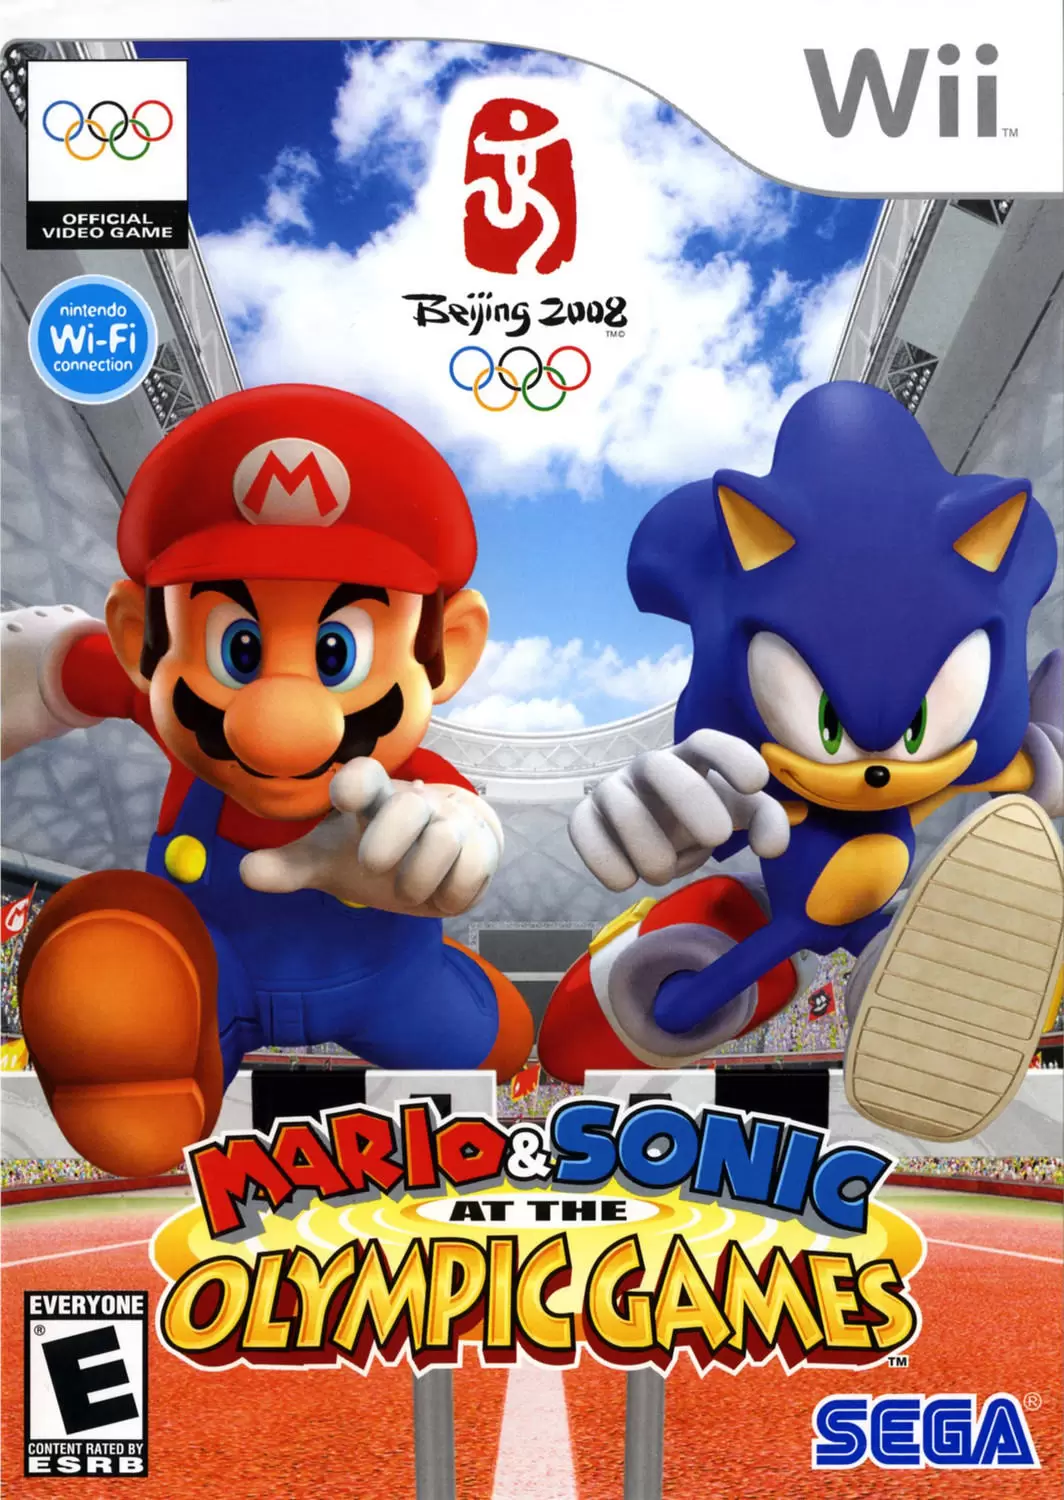 Nintendo Wii Games - Mario & Sonic at the Olympic Games